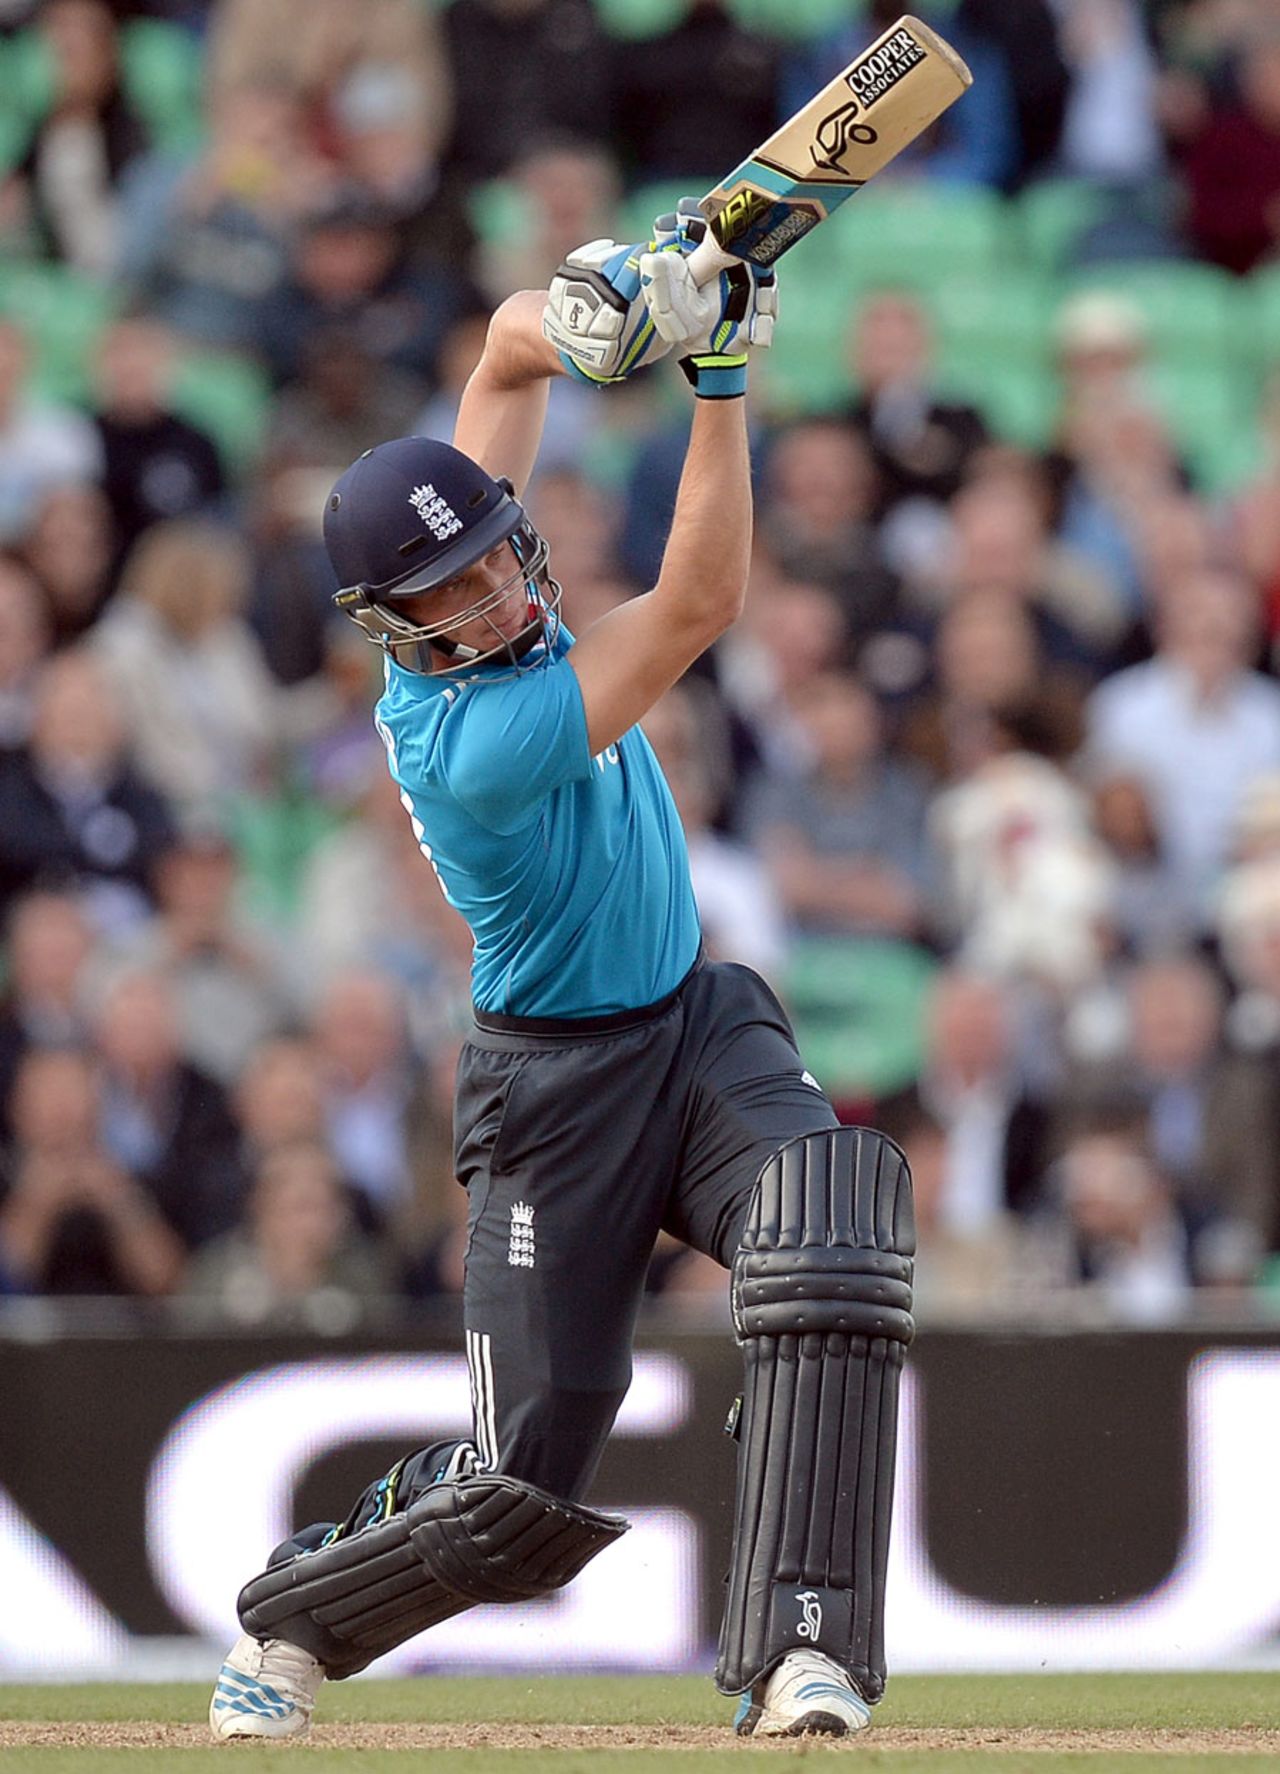 Jos Buttler took a while to find his best timing, England v Sri Lanka, 1st ODI, The Oval, May 22, 2014